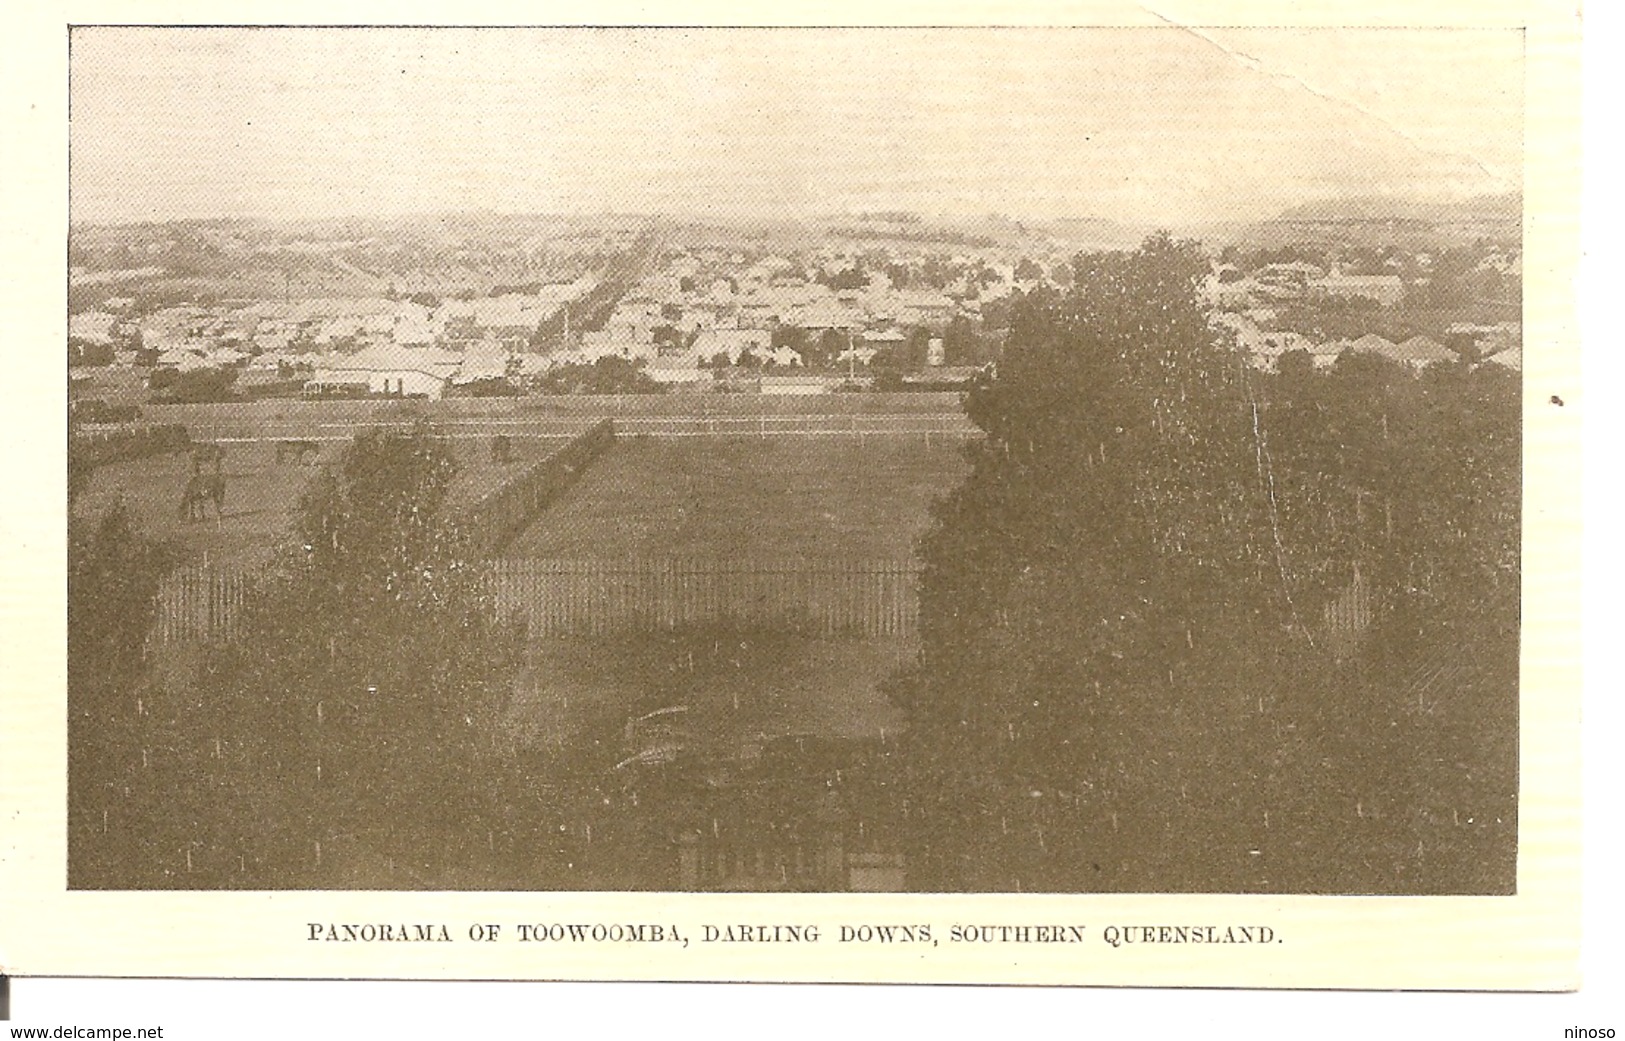 TOOWOOMBA, DARLING DOWNS,SOUTHERN QUEENSLAND  -  1908 - Towoomba / Darling Downs